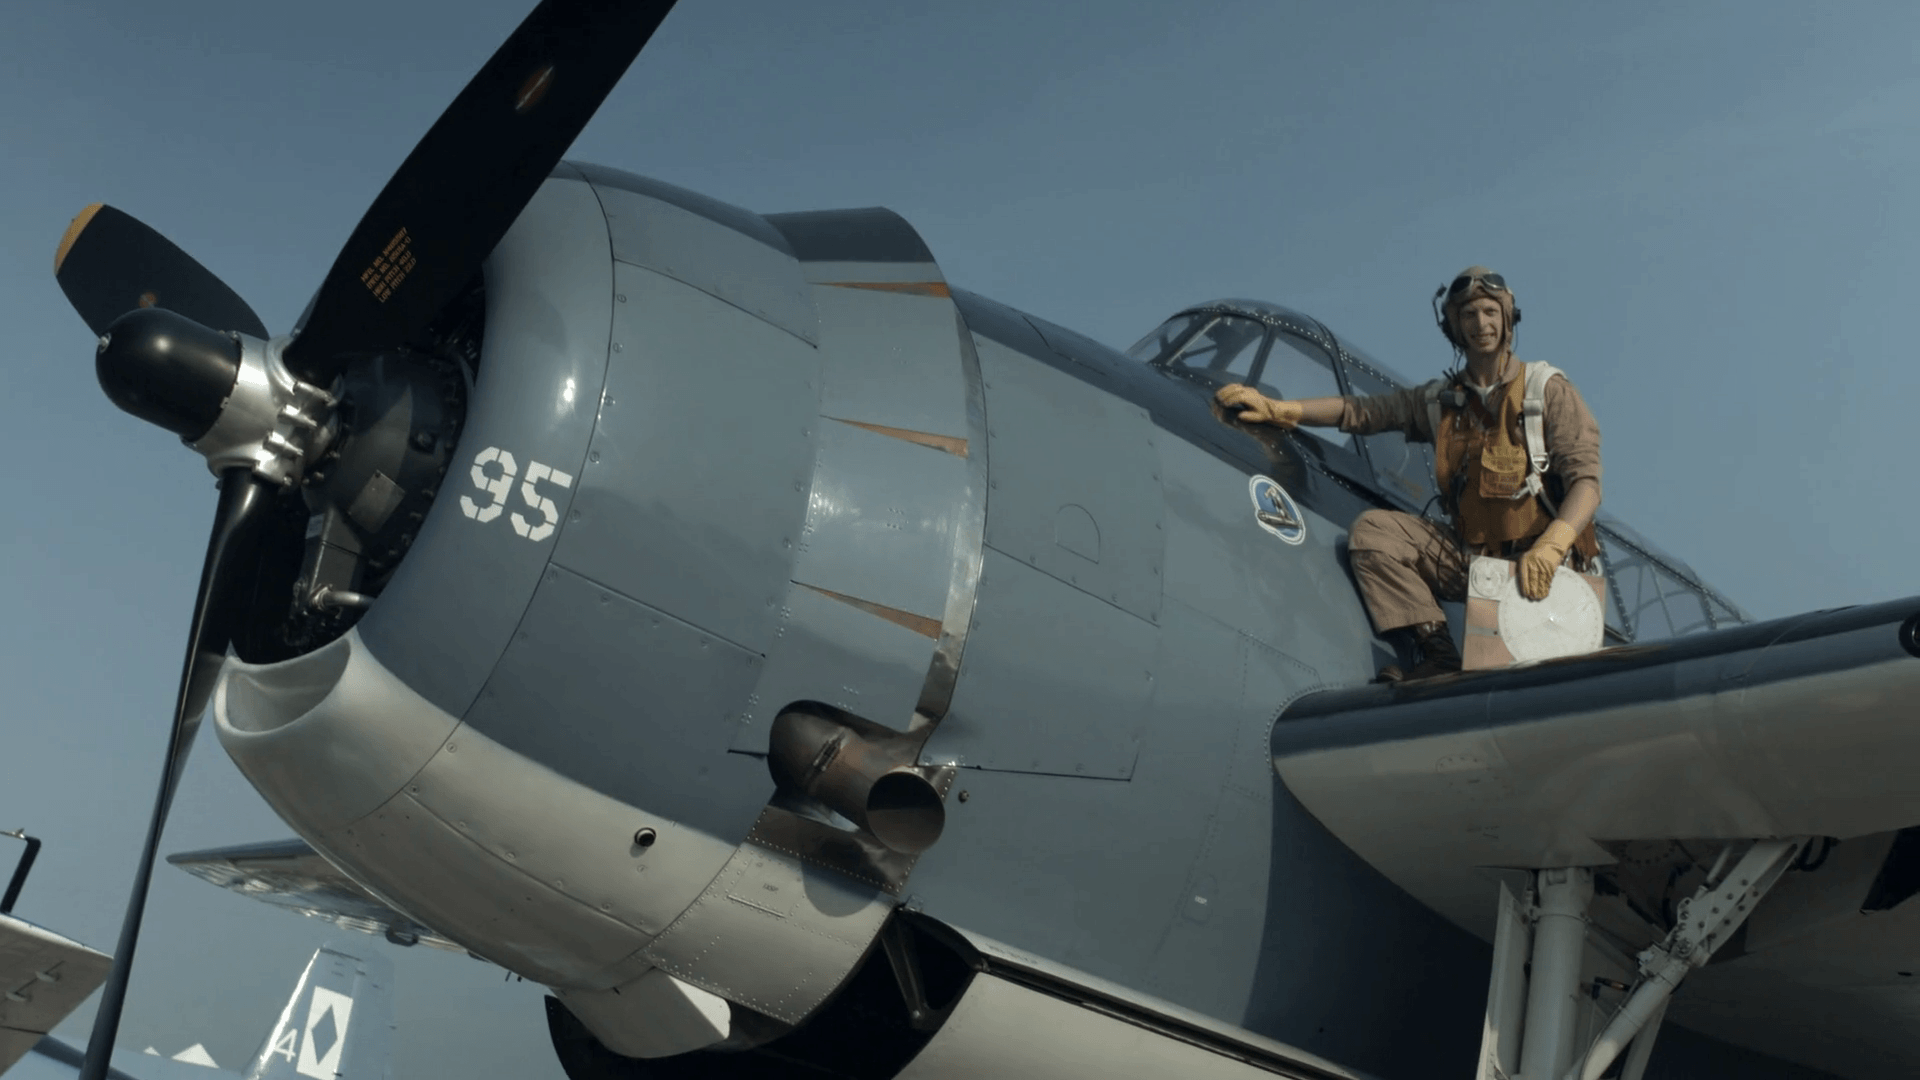 Pilot Re Enactor In Authentic Flight Gear Poses By The Cockpit Of A US Navy Grumman Avenger From World War II. Wide View, Mute. Recorded In 4K, Ultra